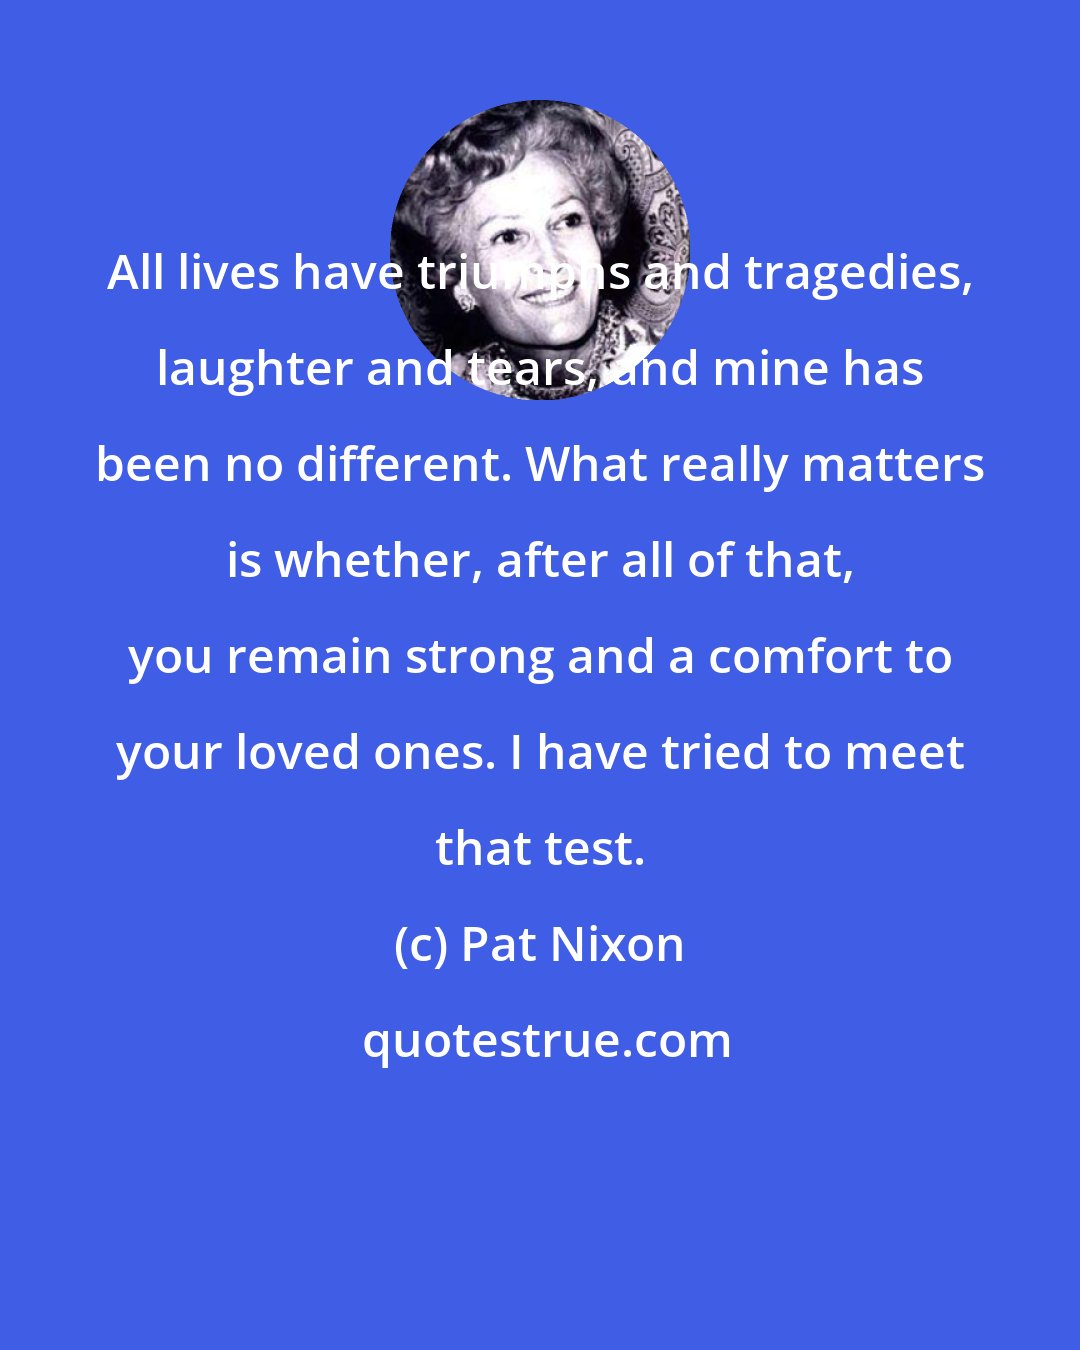 Pat Nixon: All lives have triumphs and tragedies, laughter and tears, and mine has been no different. What really matters is whether, after all of that, you remain strong and a comfort to your loved ones. I have tried to meet that test.